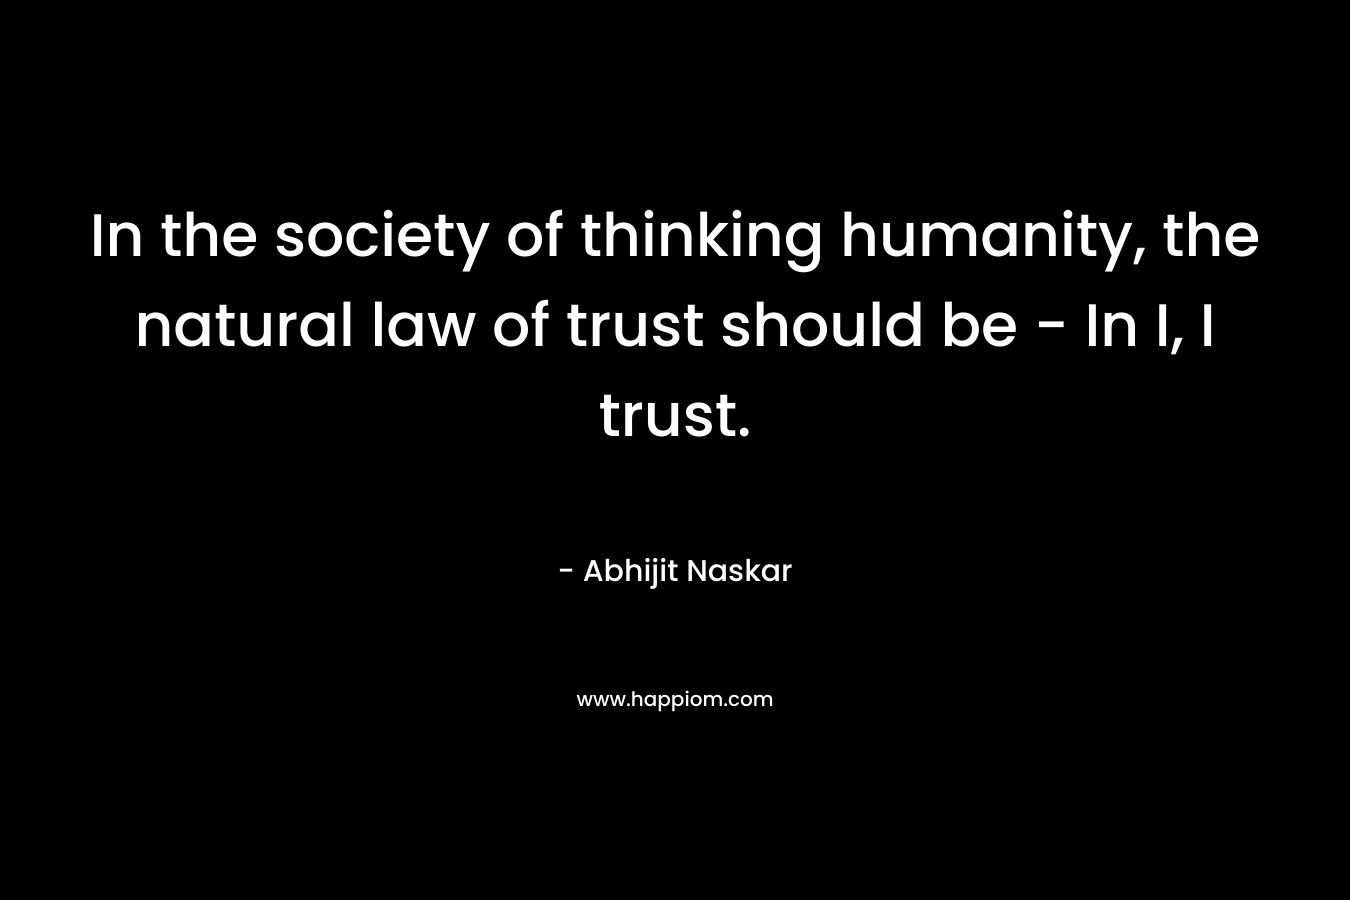 In the society of thinking humanity, the natural law of trust should be - In I, I trust.